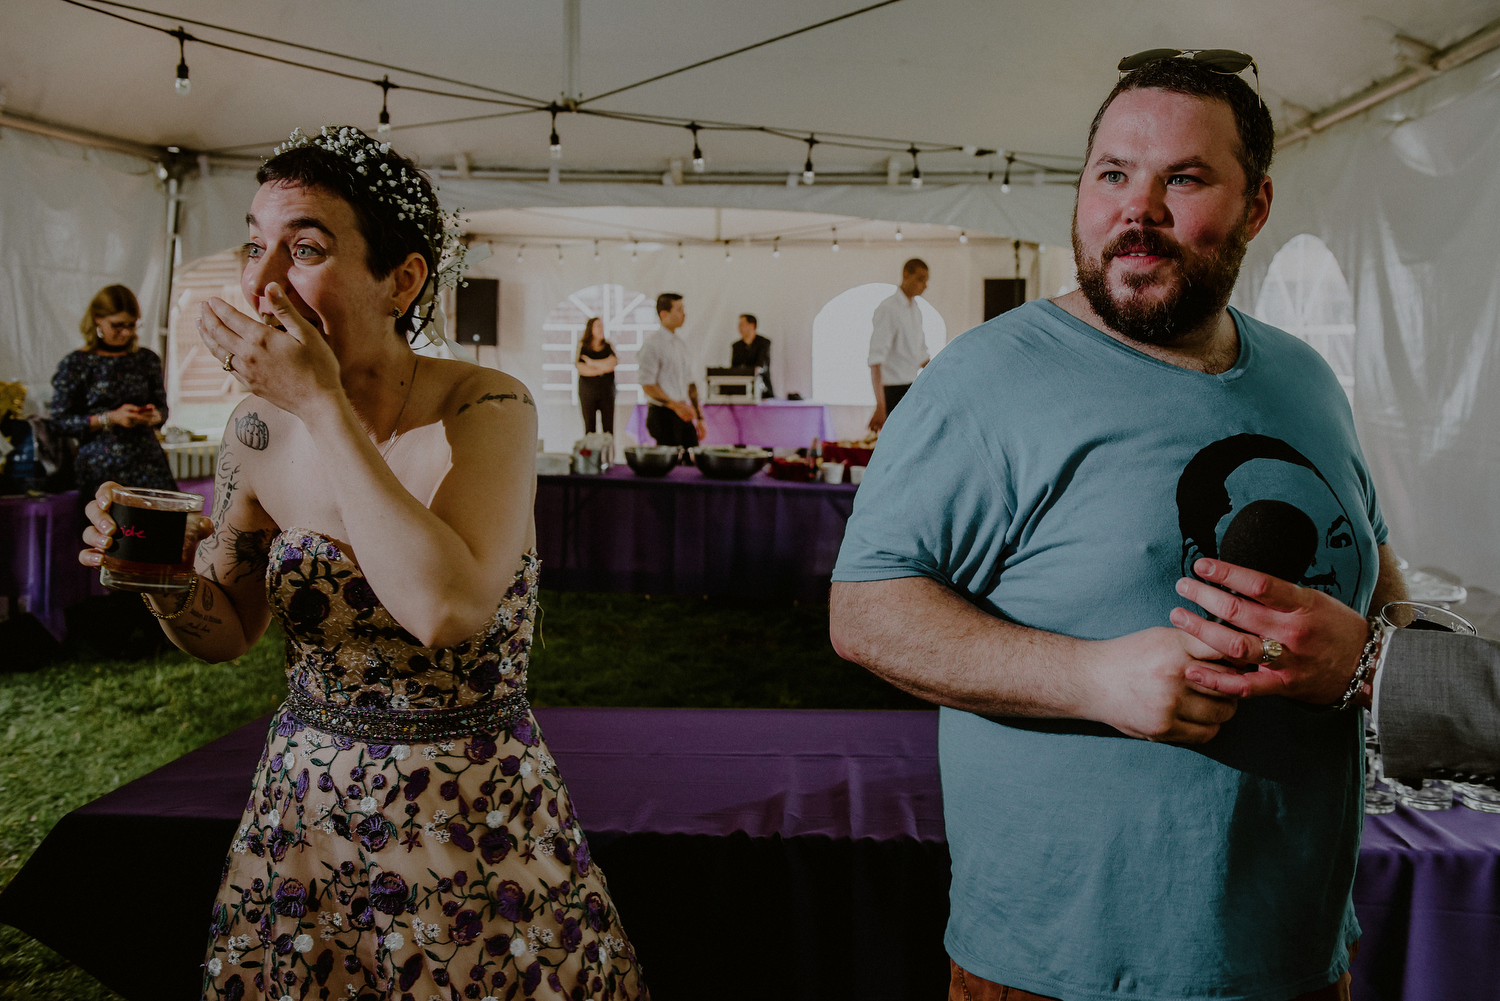 candid wedding photos of reactions during speeches